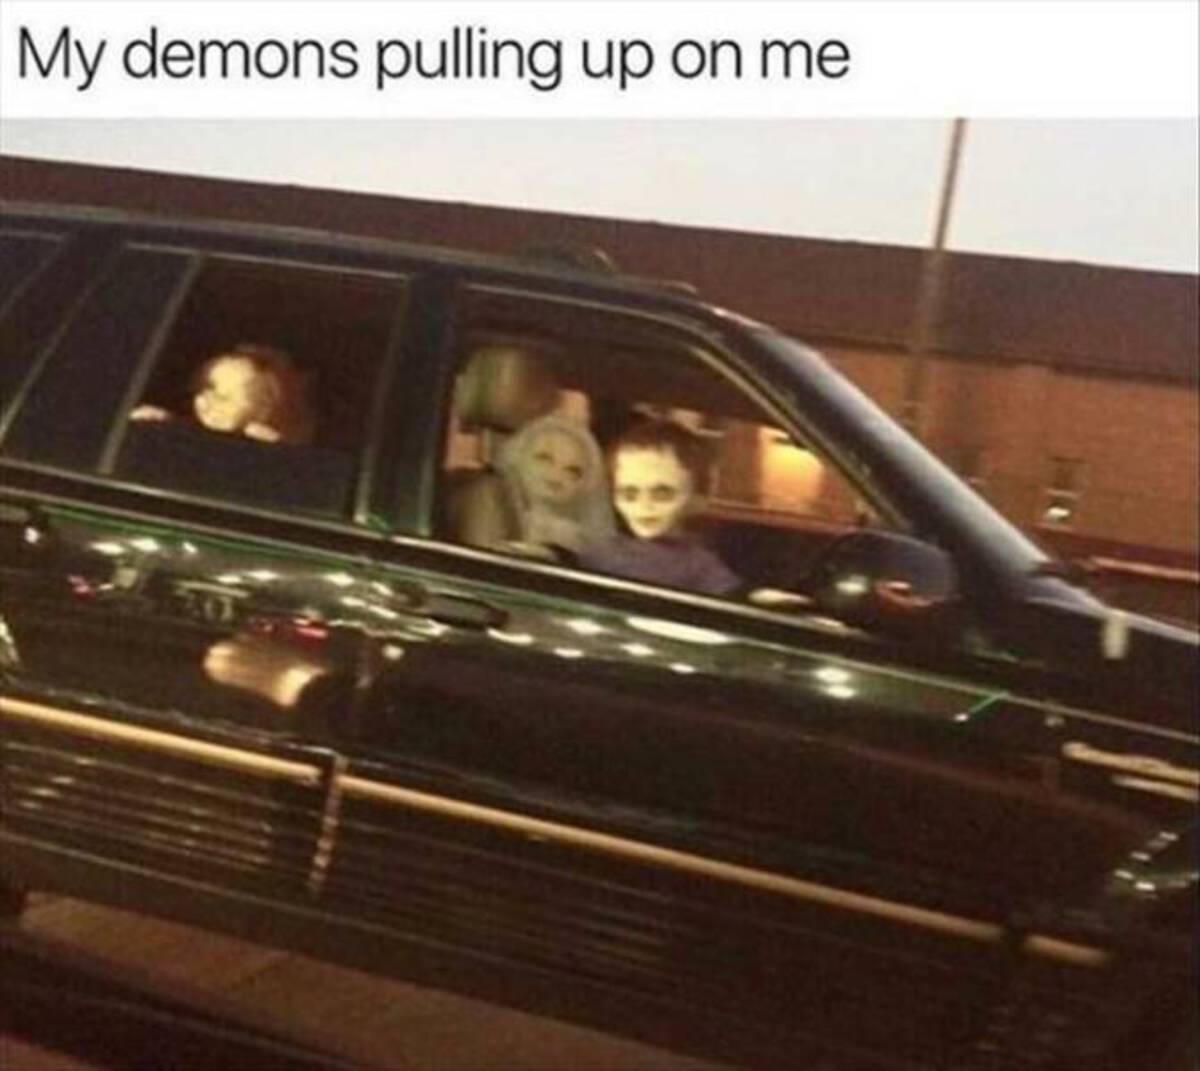 my deamos pull up on me meme - My demons pulling up on me